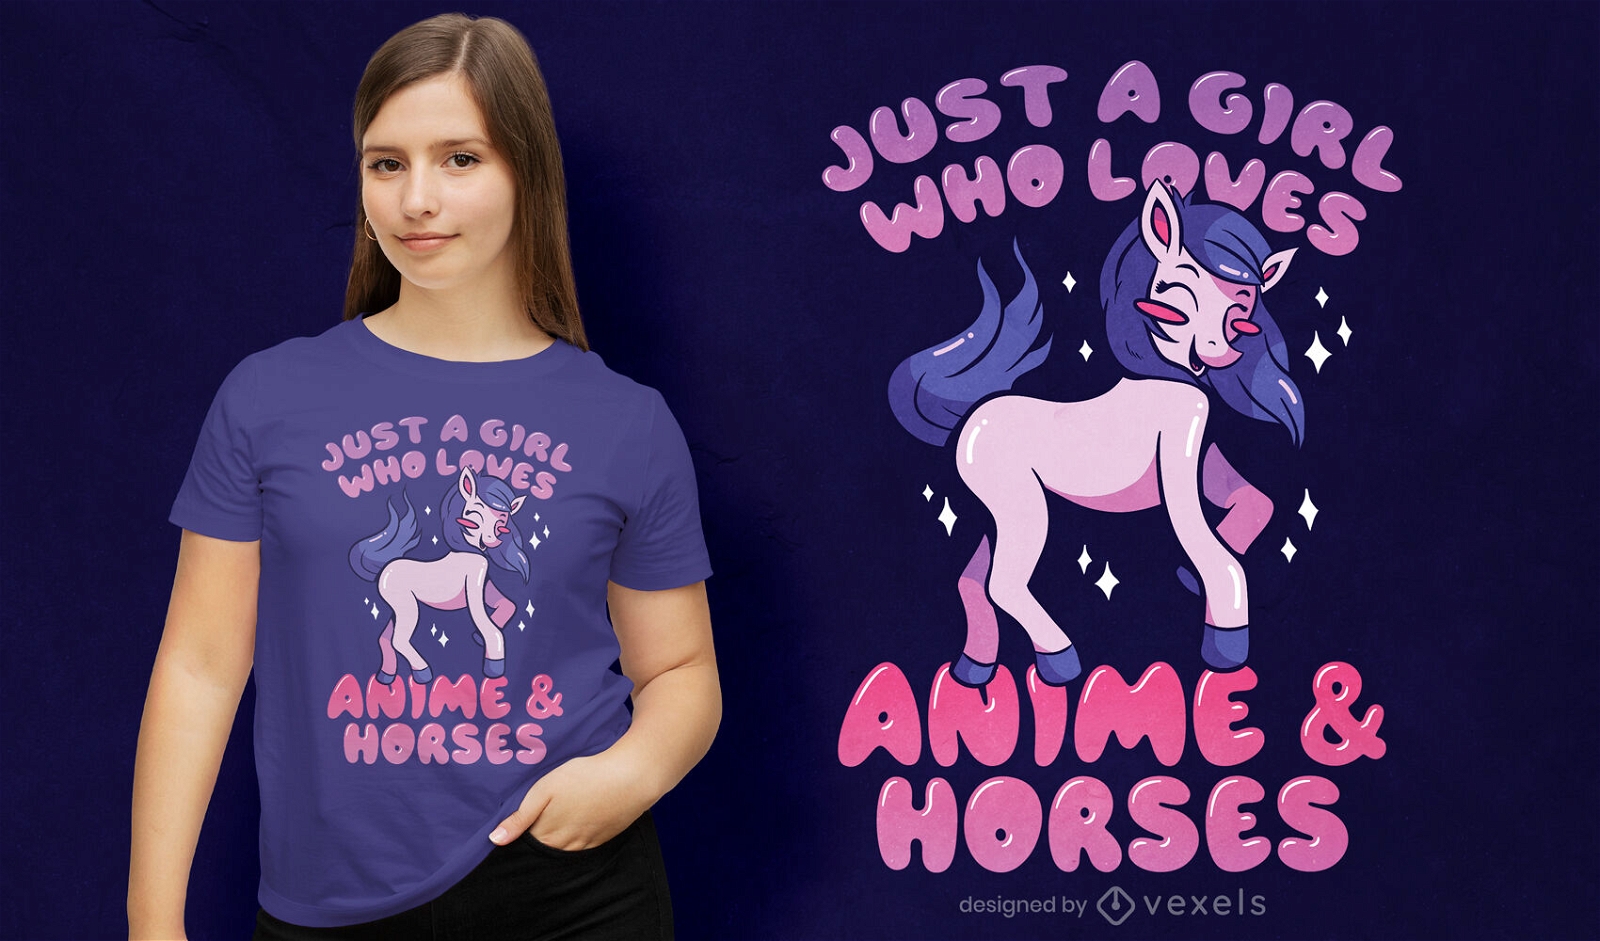 Cute anime and horses t-shirt design